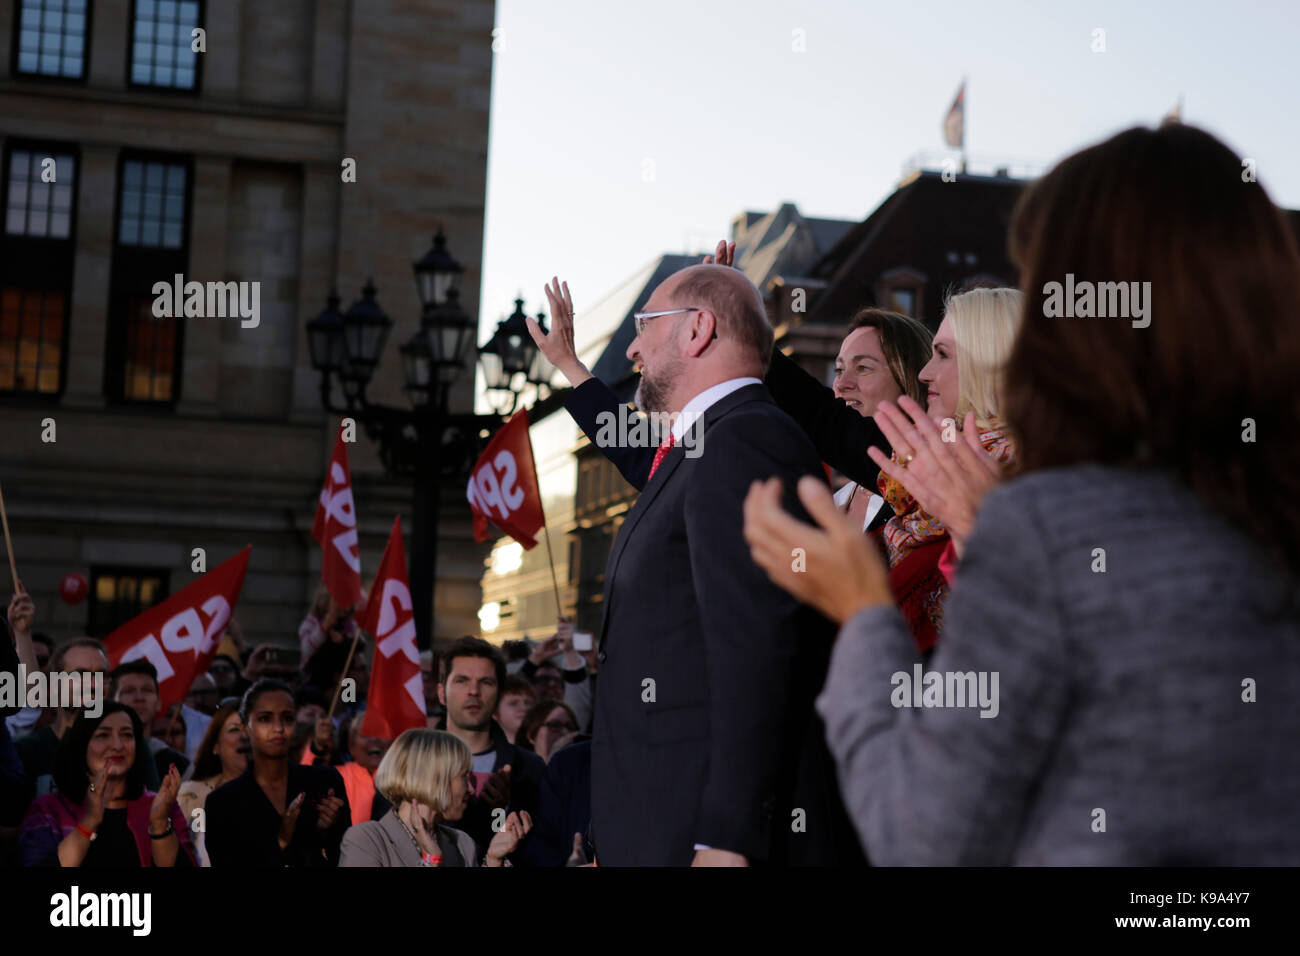 Berlin, Germany. 22nd Sep, 2017. Martin Schulz stands amidst party members on the stage, receiving the applause from the crowd. The candidate for the German Chancellorship of the SPD (Social Democratic Party of Germany) was the main speaker at a large rally in the centre of Berlin, two days ahead of the German General Election. Credit: SOPA Images Limited/Alamy Live News Stock Photo